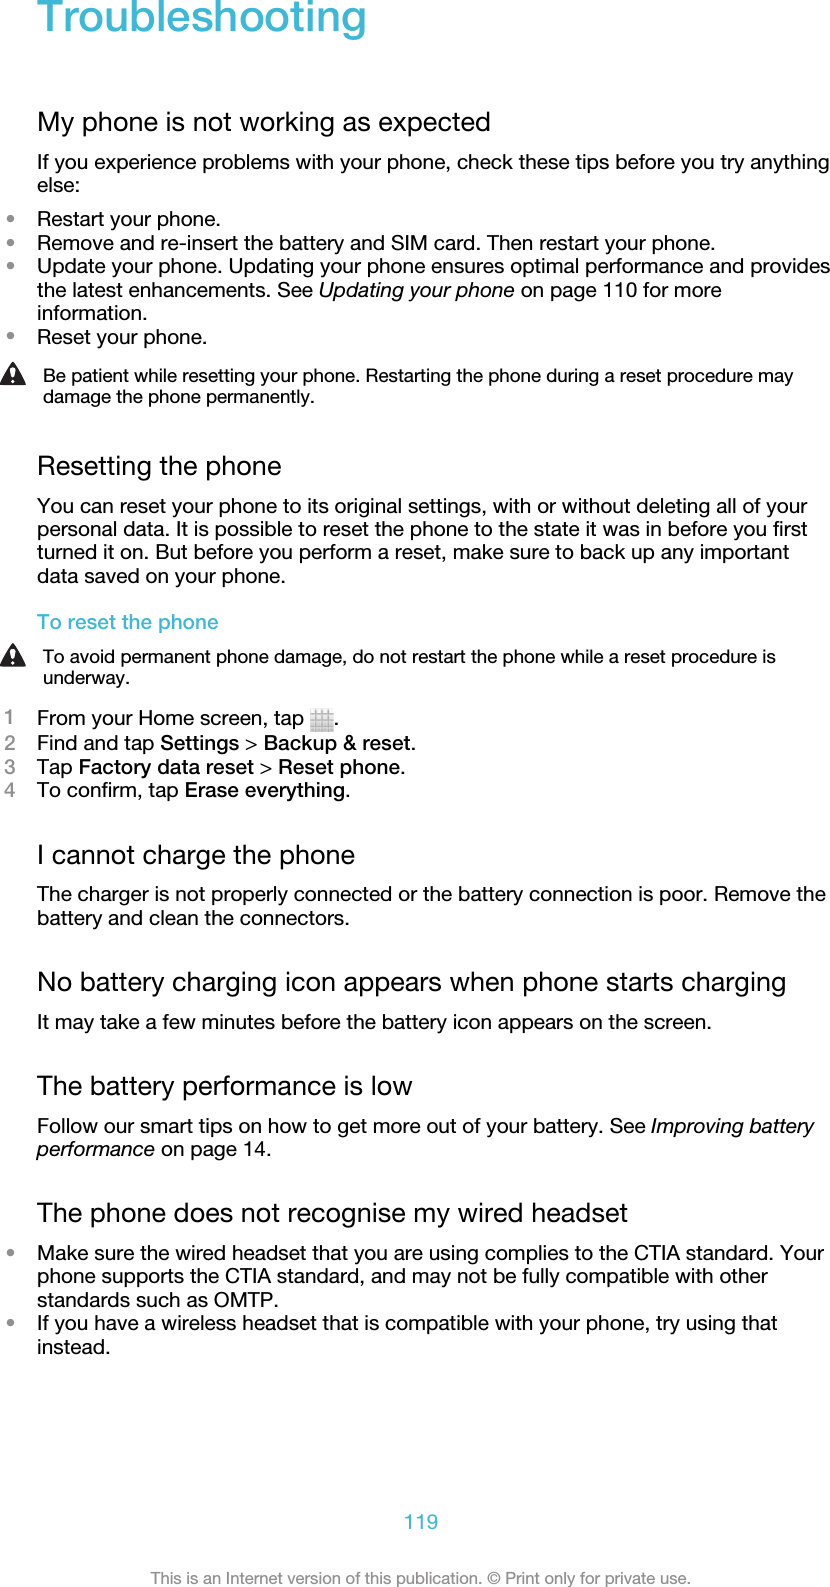 TroubleshootingMy phone is not working as expectedIf you experience problems with your phone, check these tips before you try anythingelse:•Restart your phone.•Remove and re-insert the battery and SIM card. Then restart your phone.•Update your phone. Updating your phone ensures optimal performance and providesthe latest enhancements. See Updating your phone on page 110 for moreinformation.•Reset your phone.Be patient while resetting your phone. Restarting the phone during a reset procedure maydamage the phone permanently.Resetting the phoneYou can reset your phone to its original settings, with or without deleting all of yourpersonal data. It is possible to reset the phone to the state it was in before you firstturned it on. But before you perform a reset, make sure to back up any importantdata saved on your phone.To reset the phoneTo avoid permanent phone damage, do not restart the phone while a reset procedure isunderway.1From your Home screen, tap  .2Find and tap Settings &gt; Backup &amp; reset.3Tap Factory data reset &gt; Reset phone.4To confirm, tap Erase everything.I cannot charge the phoneThe charger is not properly connected or the battery connection is poor. Remove thebattery and clean the connectors.No battery charging icon appears when phone starts chargingIt may take a few minutes before the battery icon appears on the screen.The battery performance is lowFollow our smart tips on how to get more out of your battery. See Improving batteryperformance on page 14.The phone does not recognise my wired headset•Make sure the wired headset that you are using complies to the CTIA standard. Yourphone supports the CTIA standard, and may not be fully compatible with otherstandards such as OMTP.•If you have a wireless headset that is compatible with your phone, try using thatinstead.119This is an Internet version of this publication. © Print only for private use.